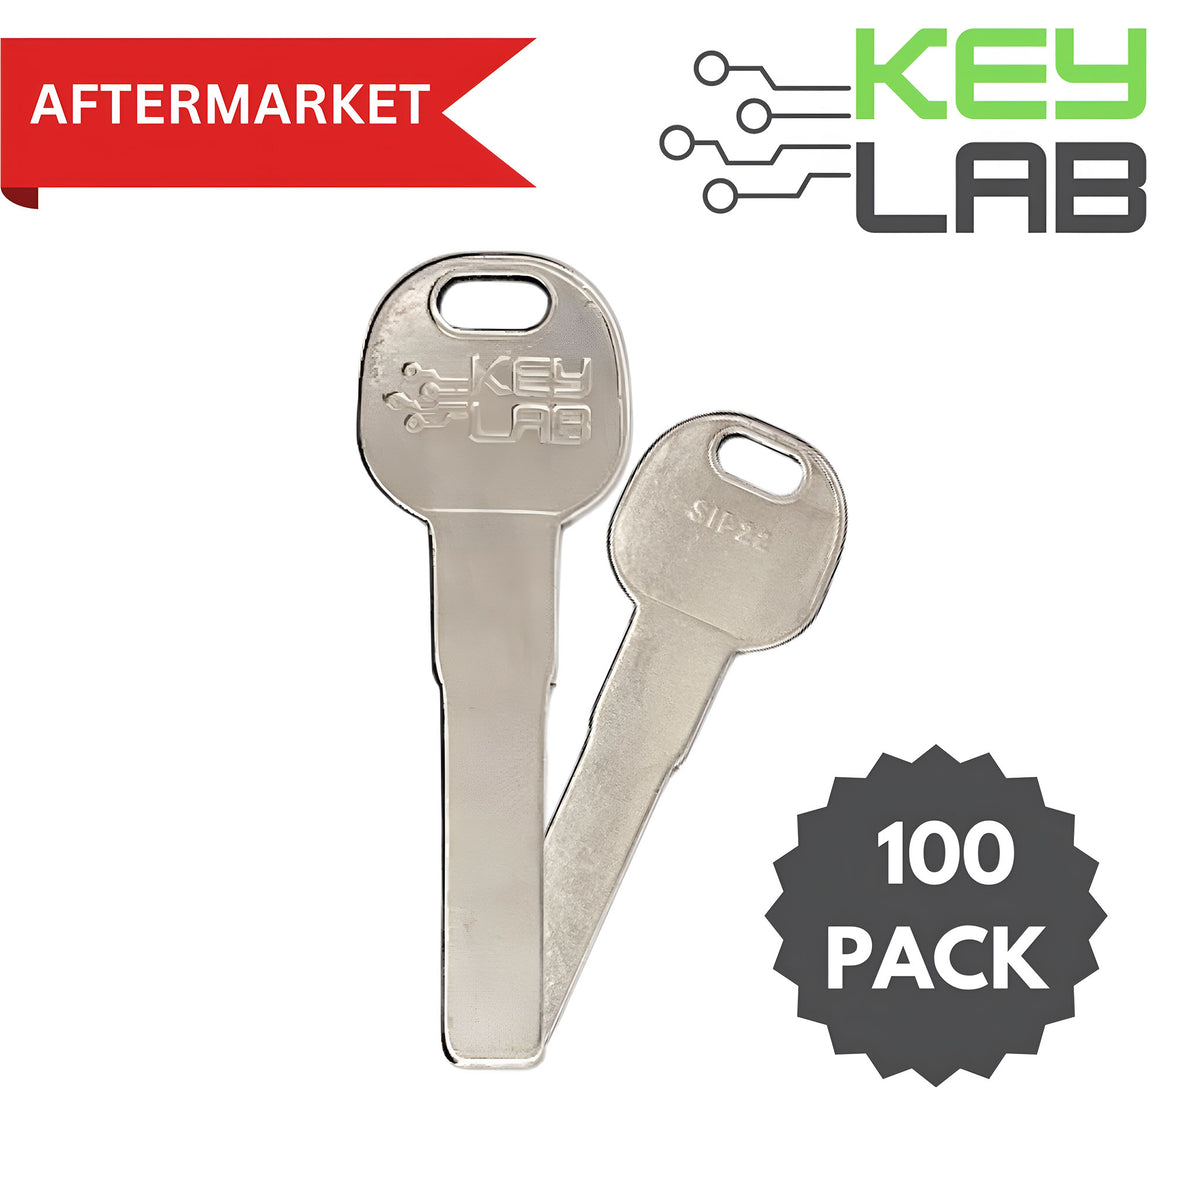 Jeep/Dodge/Fiat Aftermarket 2012-2019 Renegade, Compass, Promaster, Fiat 500 Metal Key SIP22 (Pack of 100) - Royal Key Supply